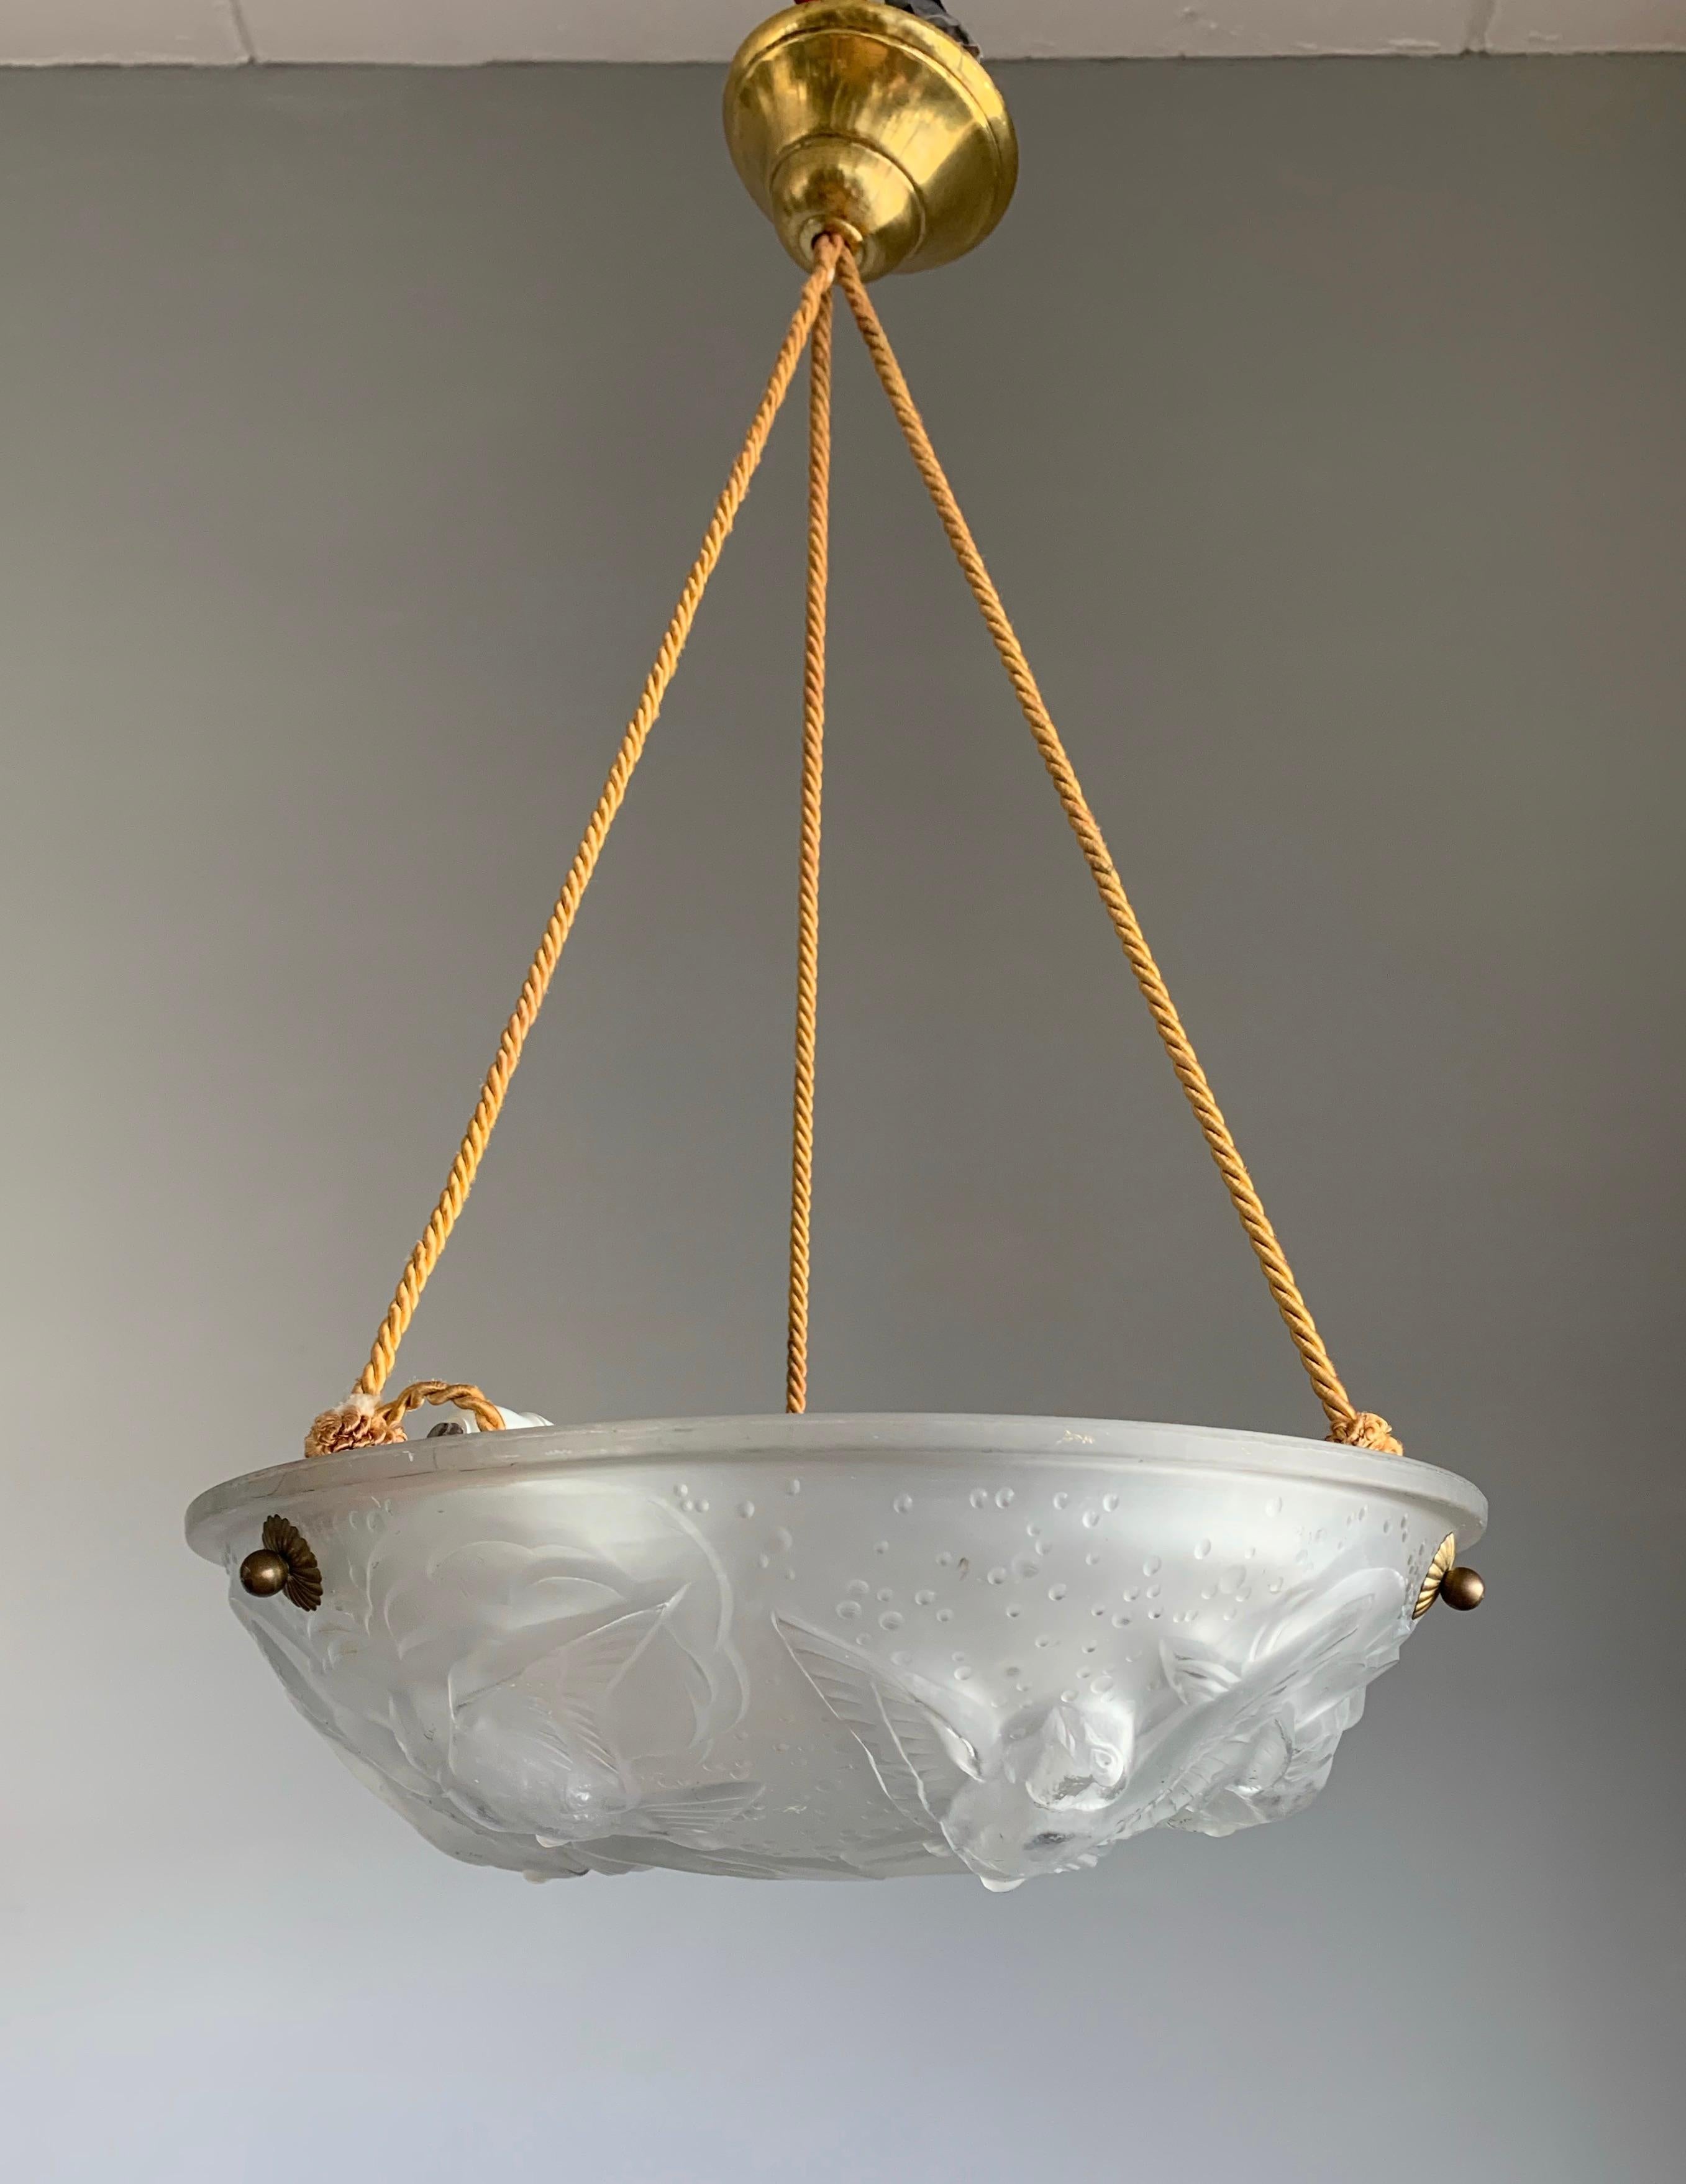 Stylish Art Deco Chandelier, Frosted Glass with Flying House Sparrows by Muller For Sale 3